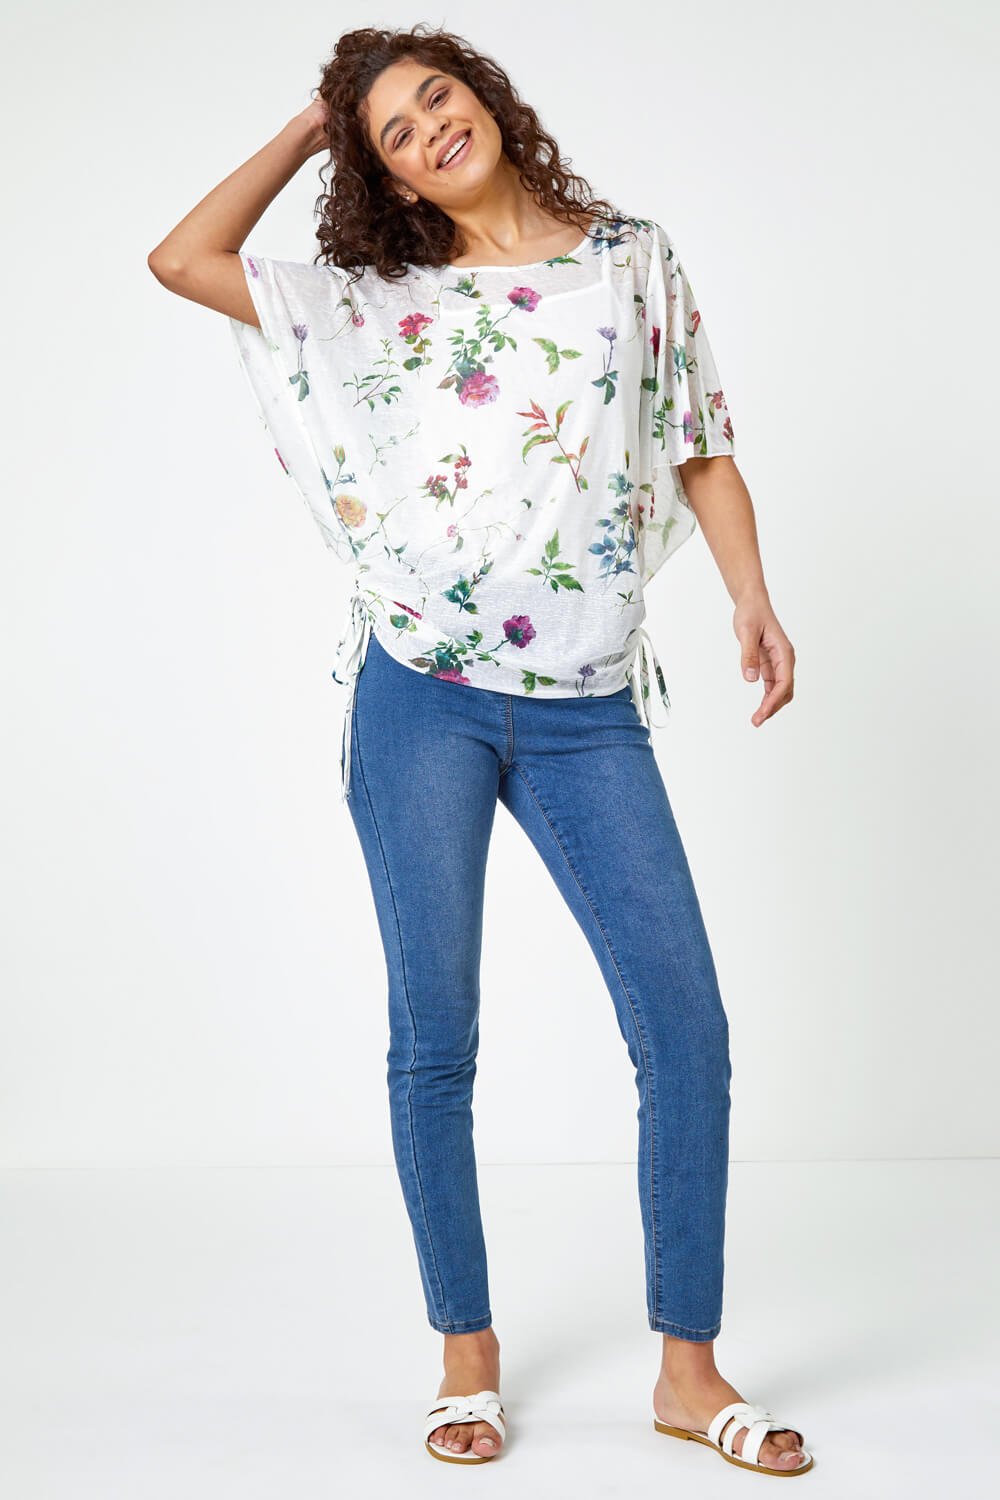 Ivory  Floral Print Ruched Batwing Top, Image 2 of 5